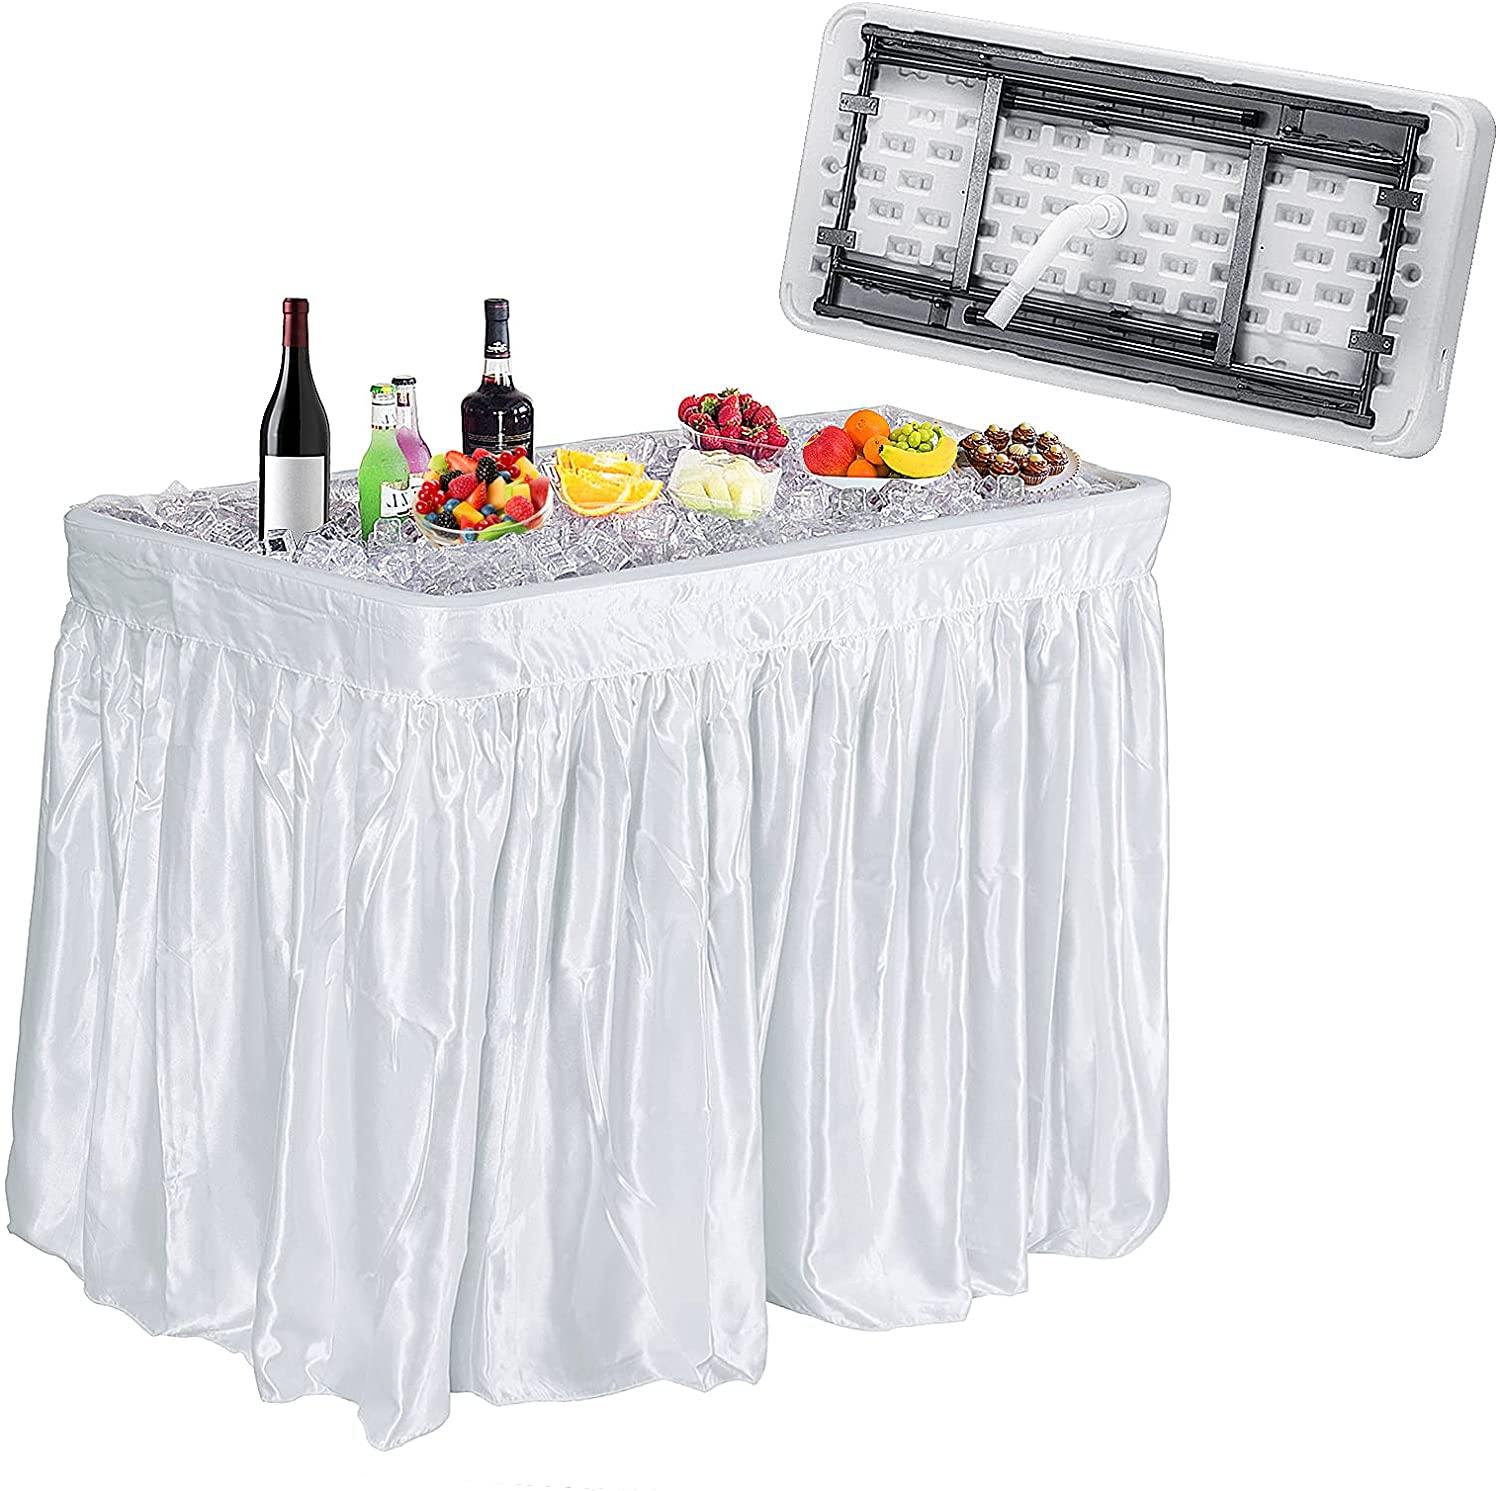 Giantex 4 Foot Ice Cooler Table w/ Matching Skirt and Drain Plug, Foldable Buffet Cold Food Keeper for Party - Giantexus